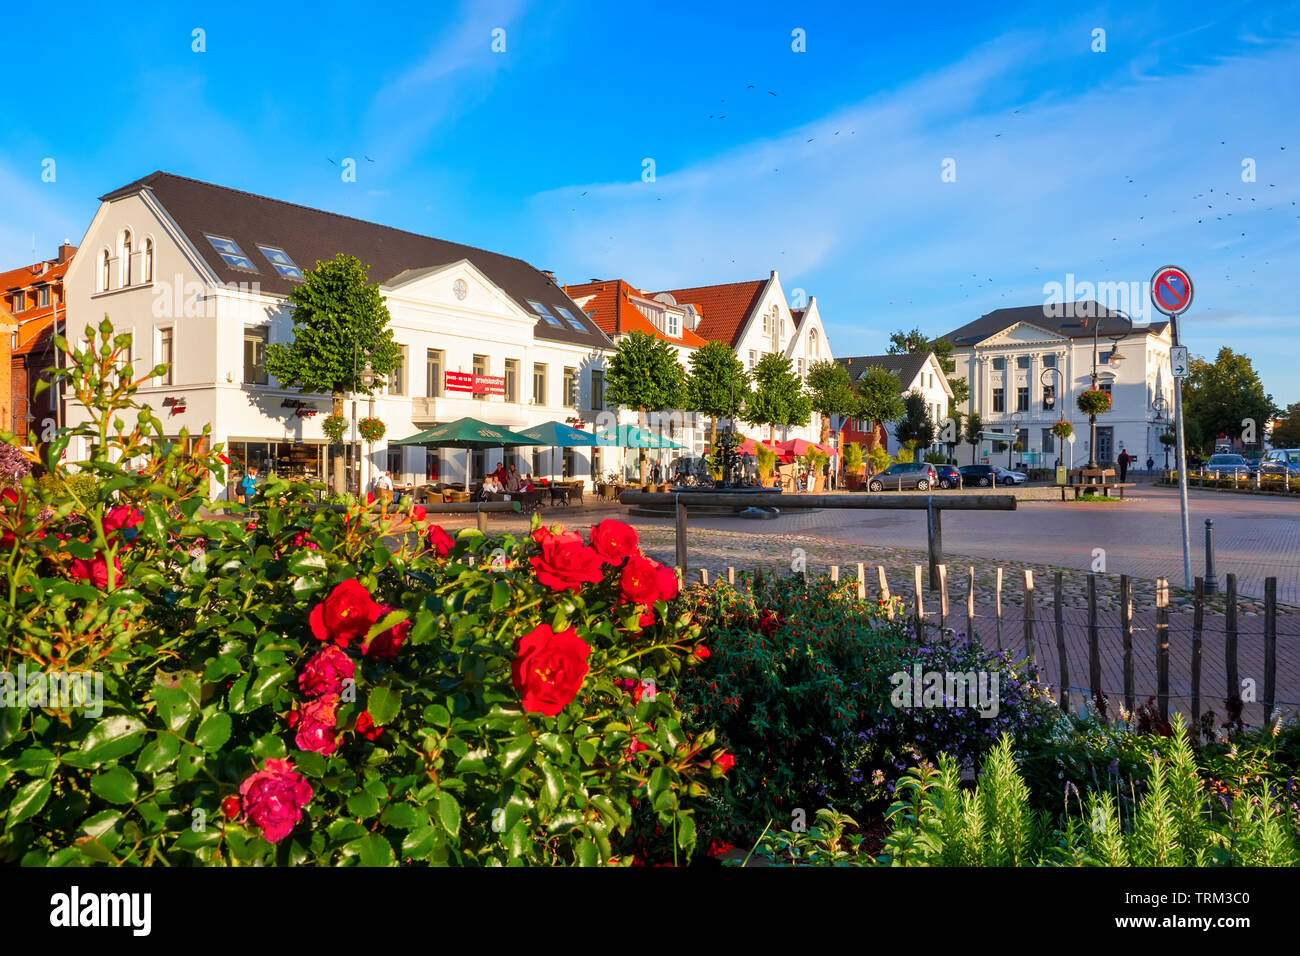 Jever, Germany, 09/29/2015: Alter Markt (old market) with Sagenbrunnen (Fountain of Legends) and flowering roses in the foreground in the City of Jeve Stock Photo